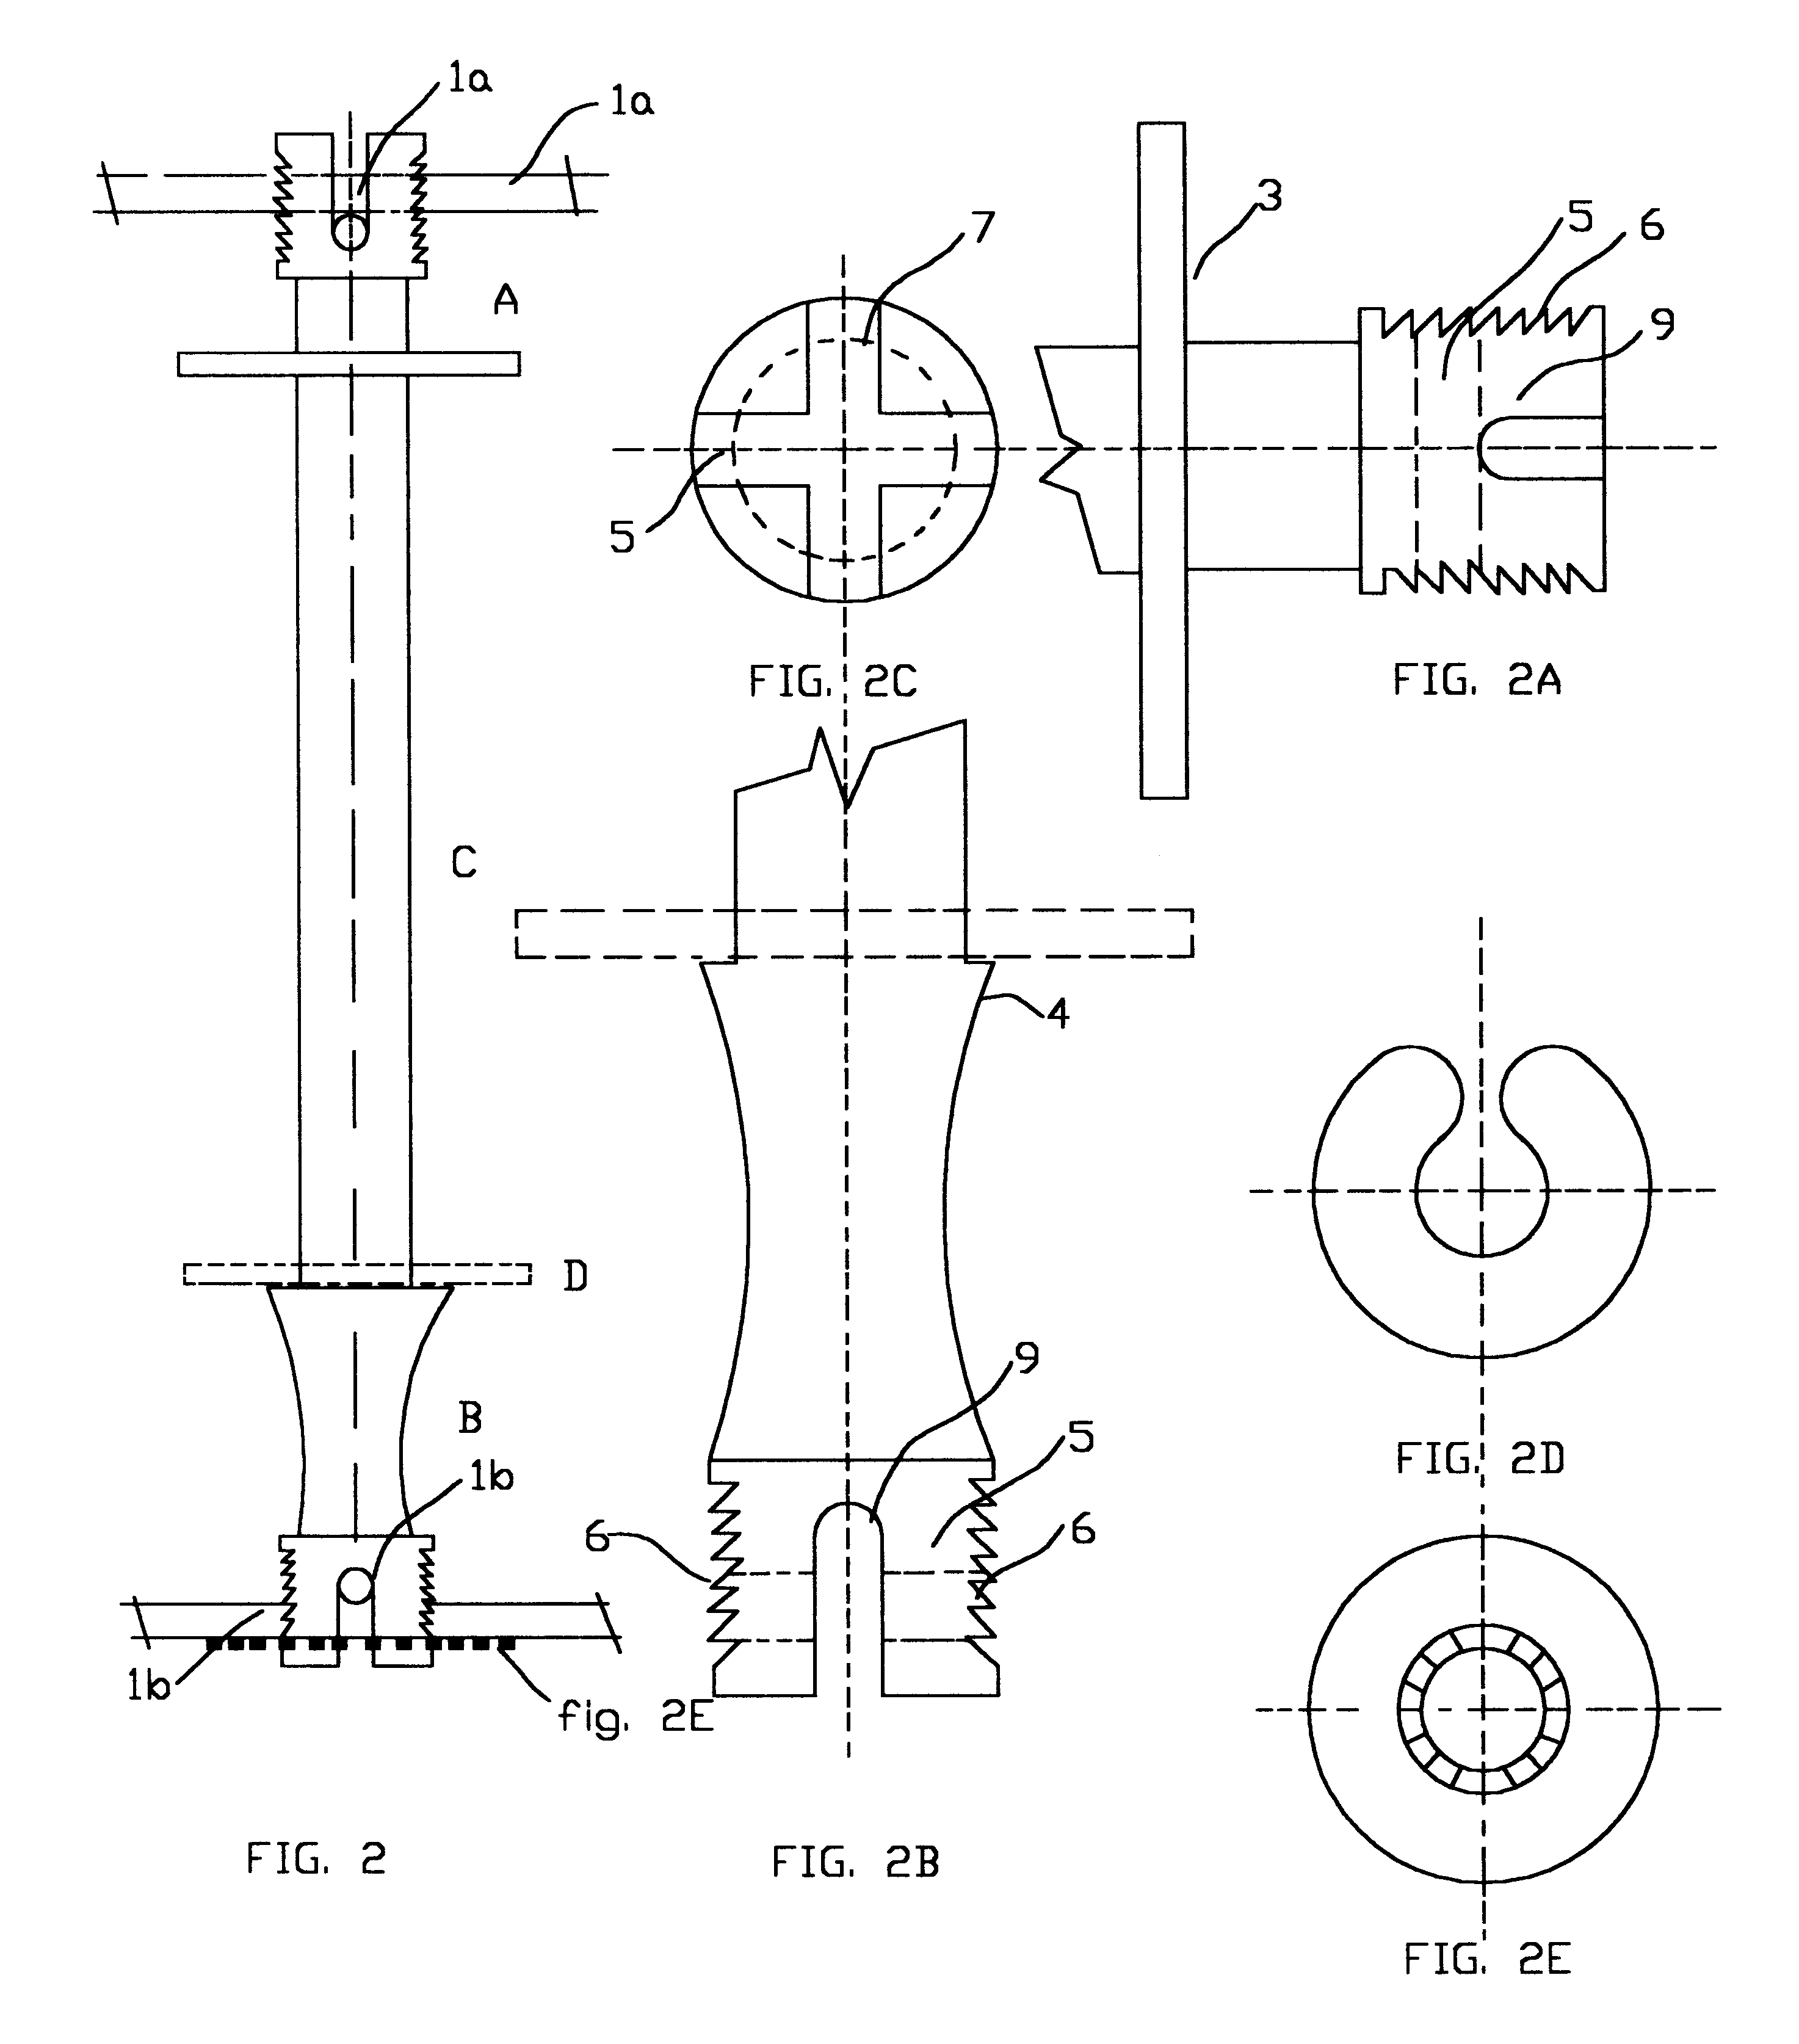 Method for concrete building system using composite panels with highly insulative plastic connector